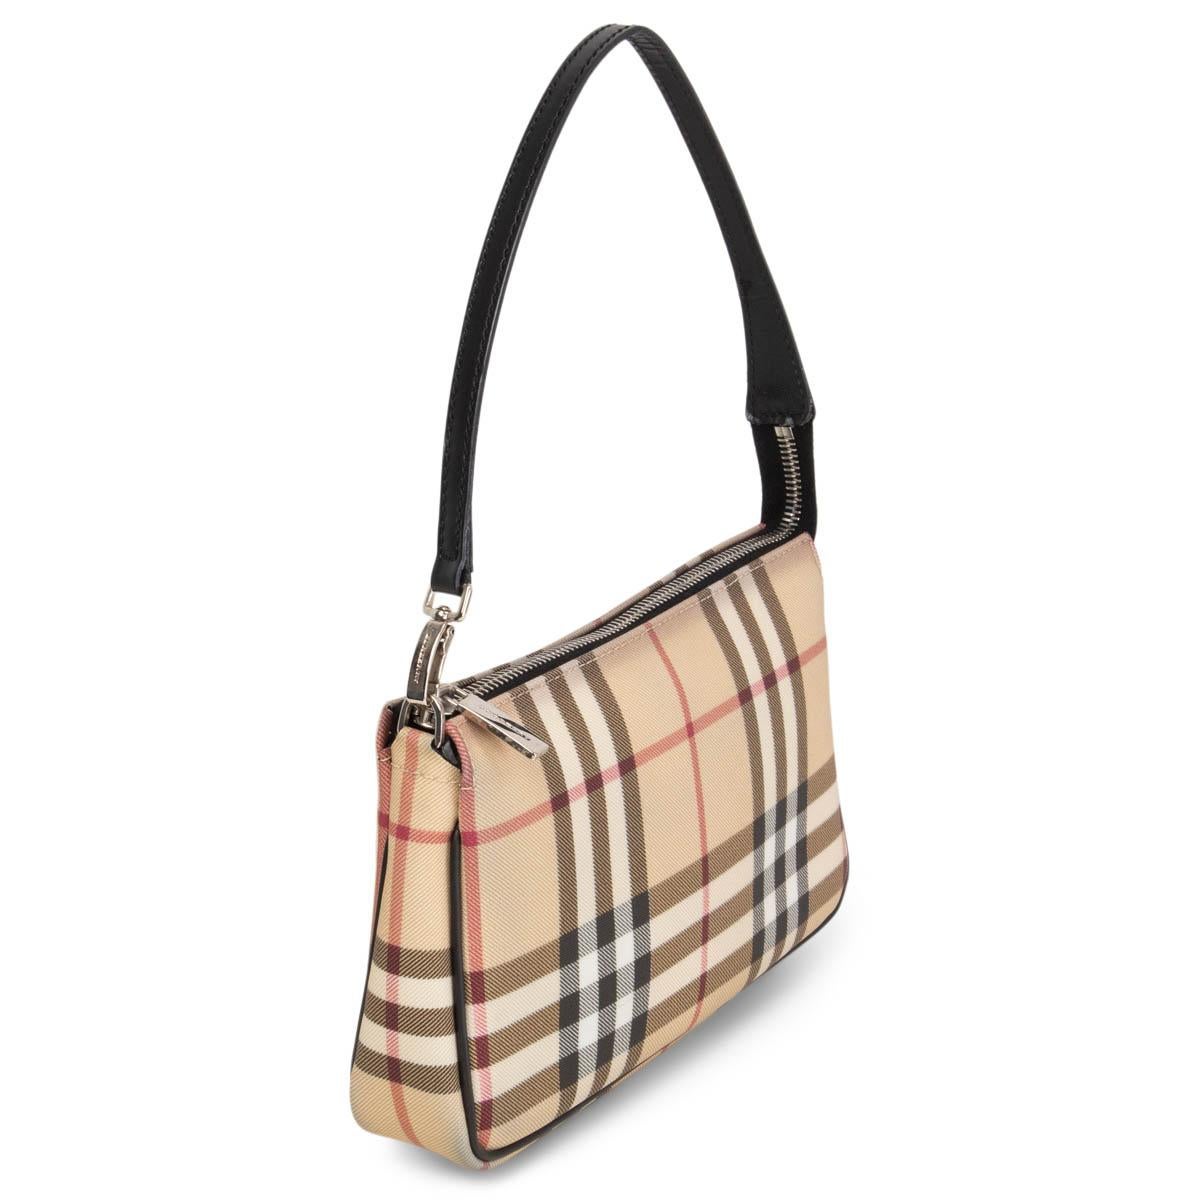 100% authentic Burberry pochette is crafted from signature classic check in beige, white, black and red coated canvas. A zip closure opens to a black canvas lined interior. Has been carried and is in excellent condition. 

Measurements
Height	13cm